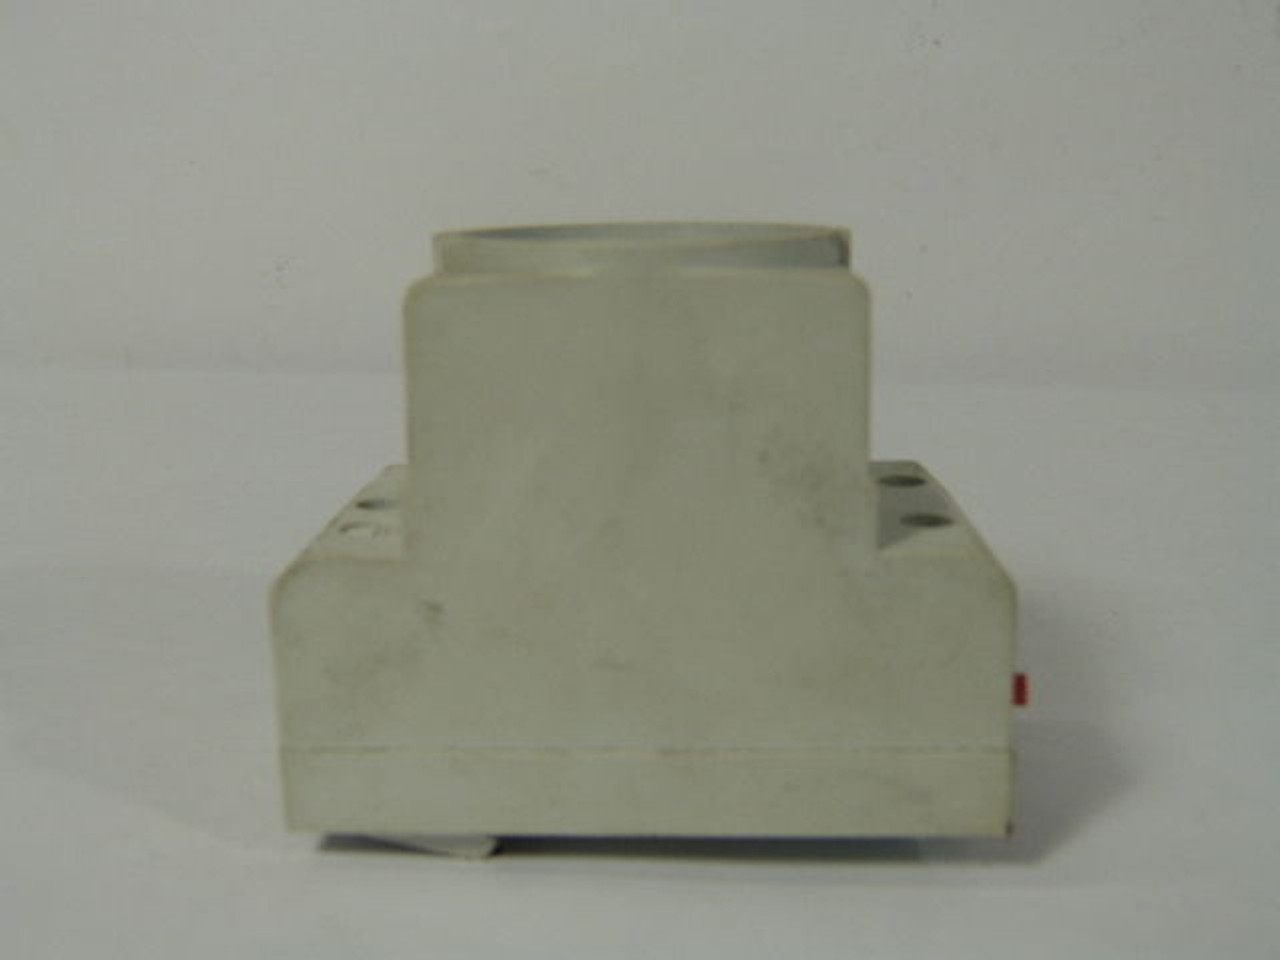 Hager N129 Electrical Receptacle Connector USED